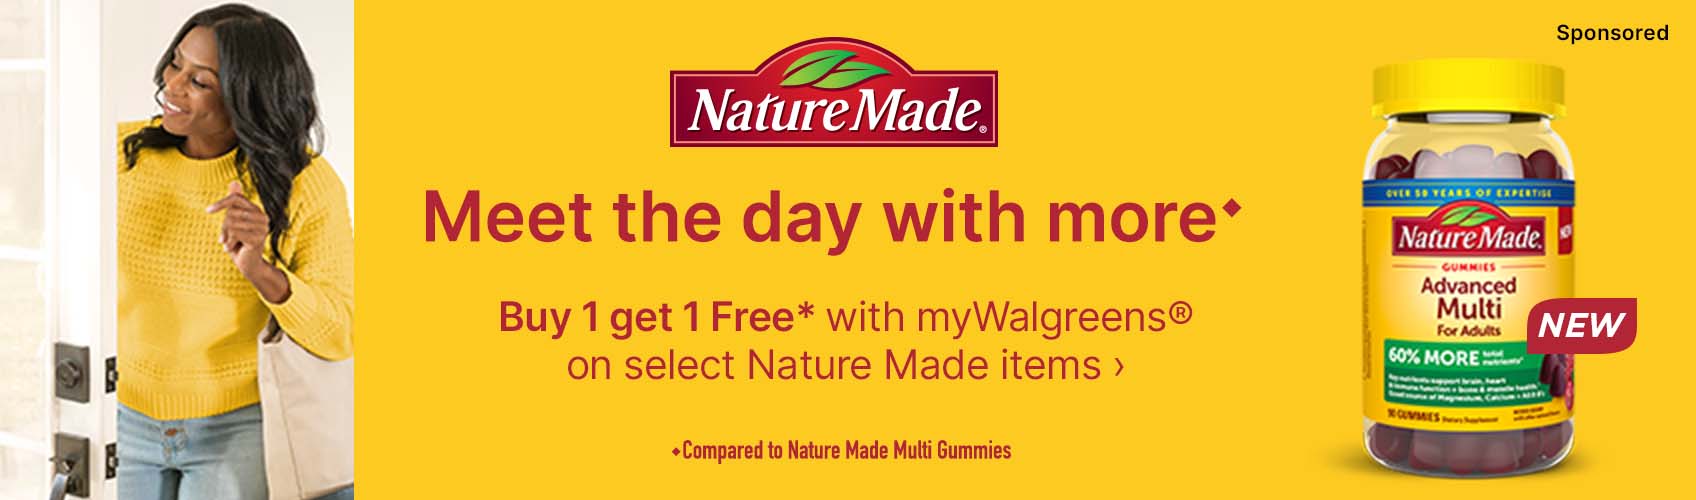 Nature Made(R) Meet the day with more. Buy 1 get 1 Free* with myWalgreens(R) on select Nature Made items. Compared to Nature Made Multi Gummies. NEW. Sponsored